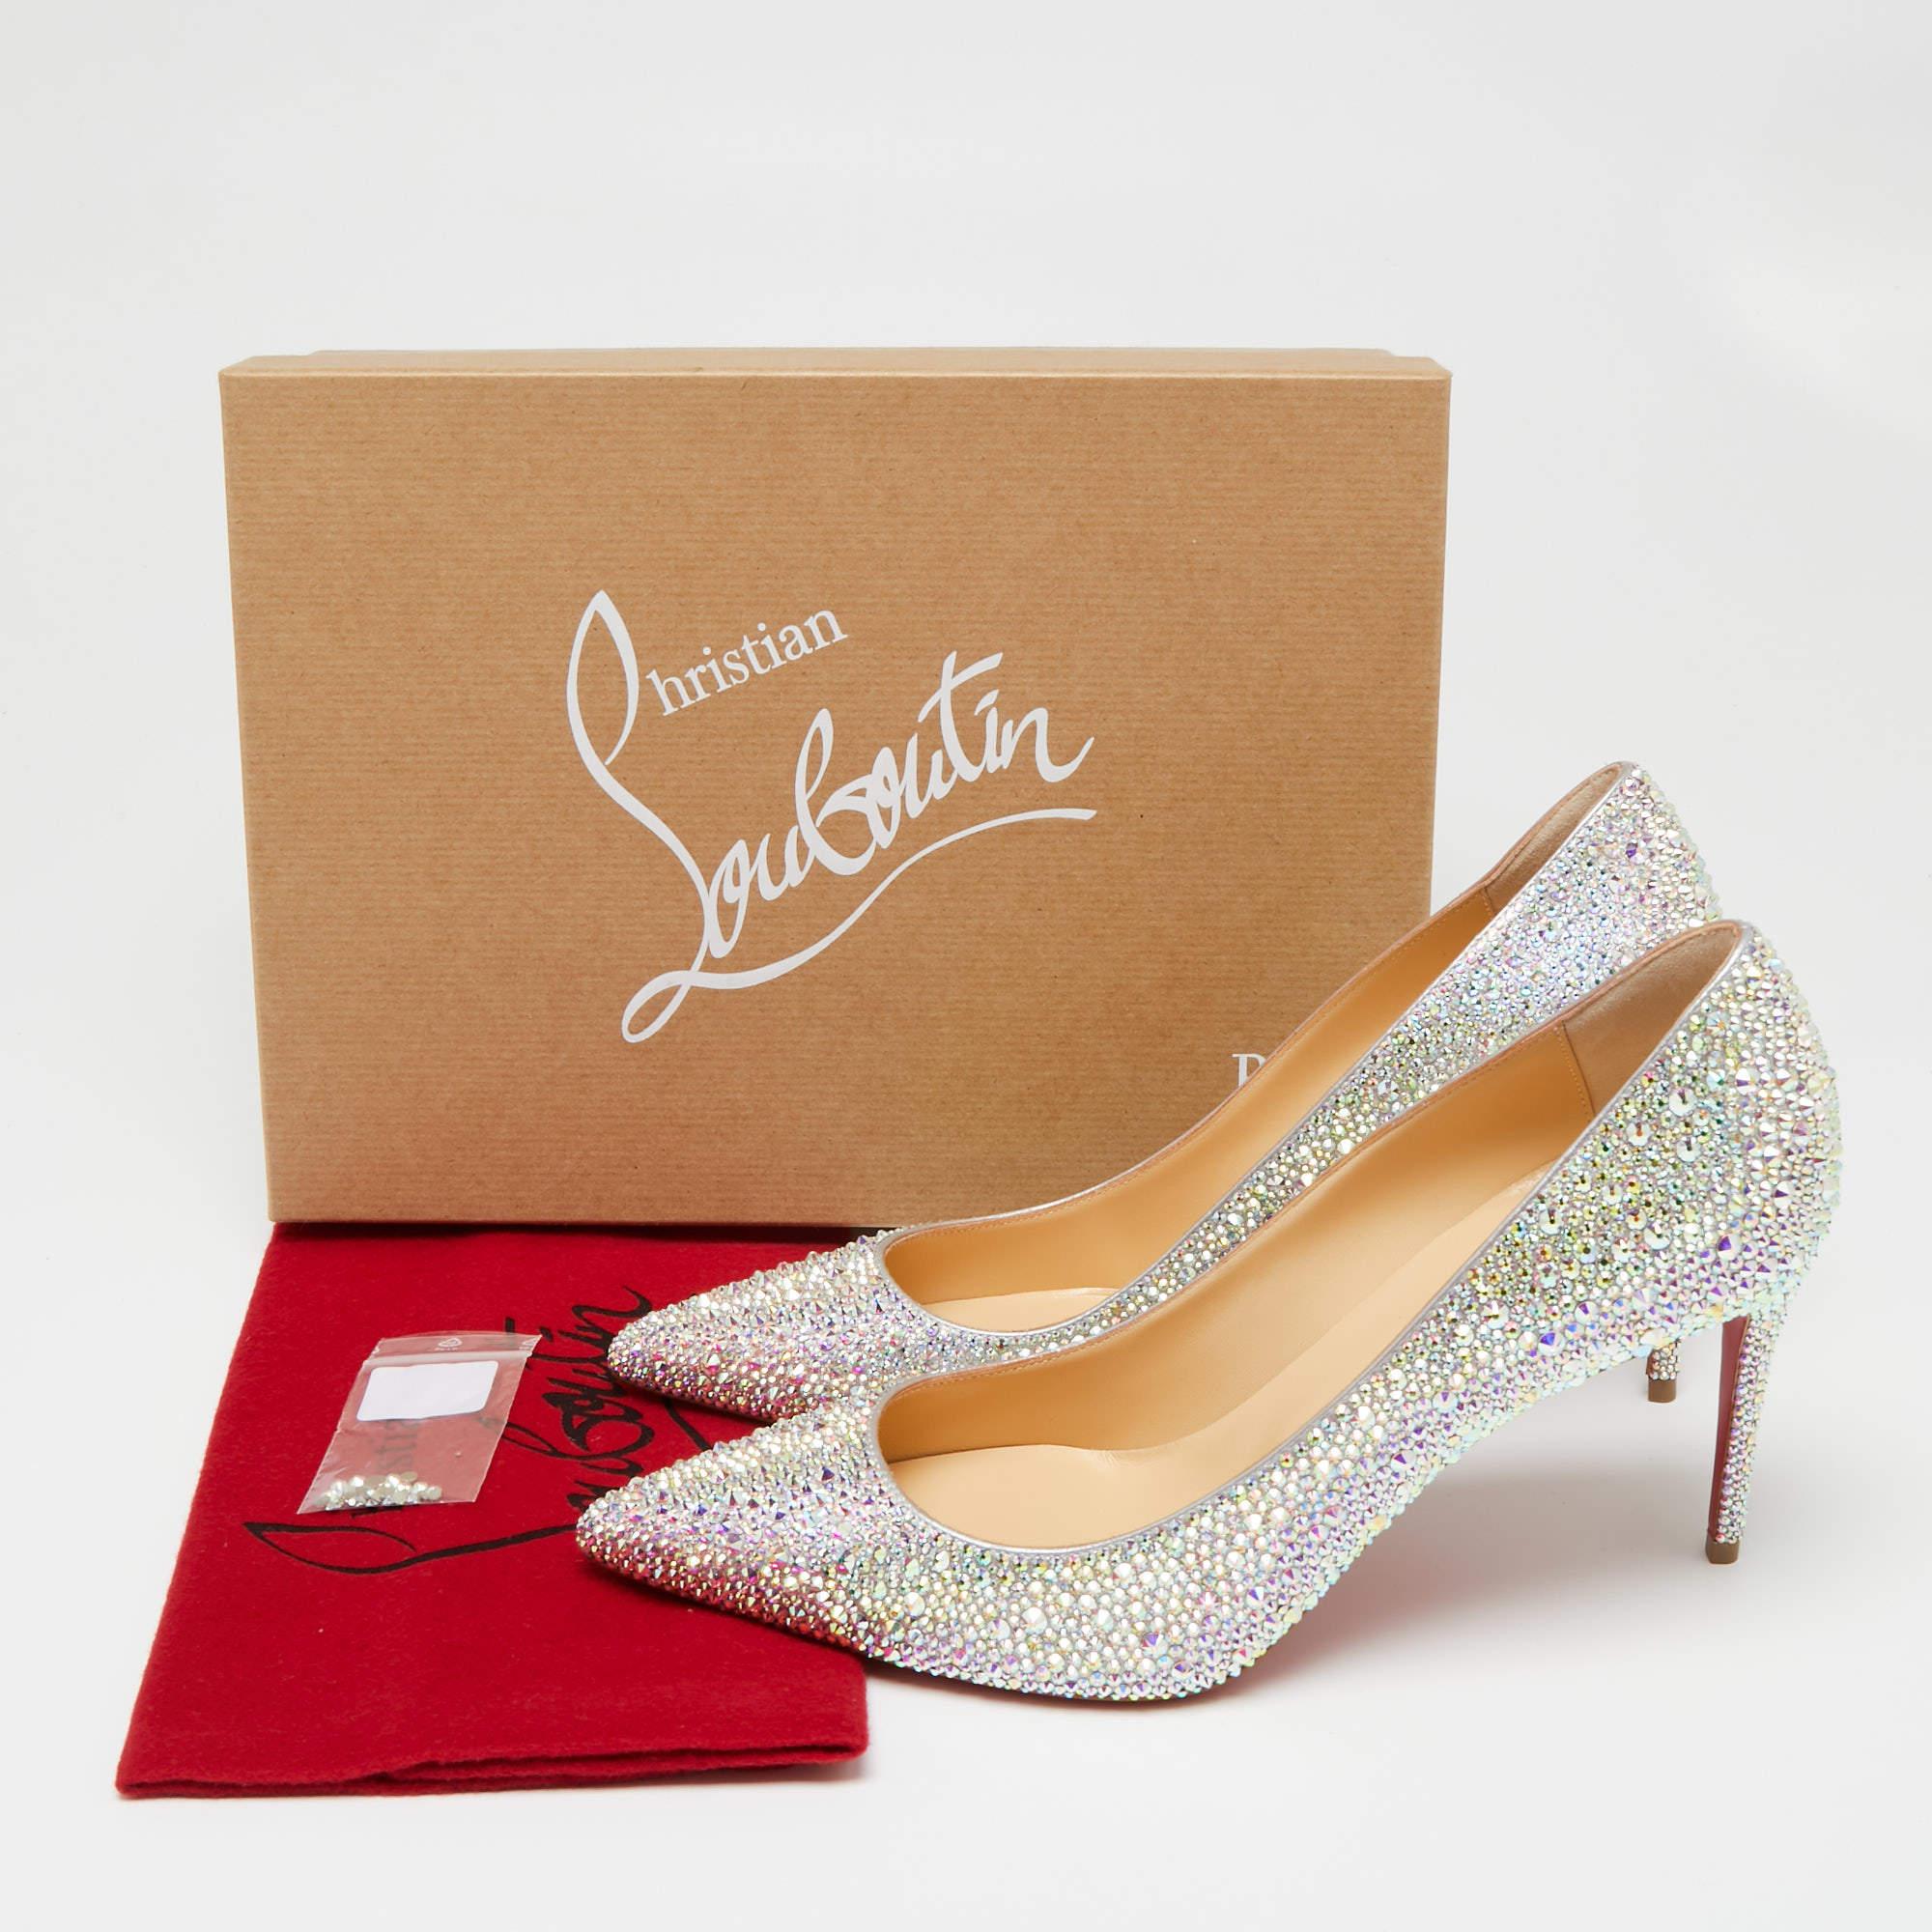 Christian Louboutin Multicolor Leather Strass Degrade Kate Pumps Size 39 4